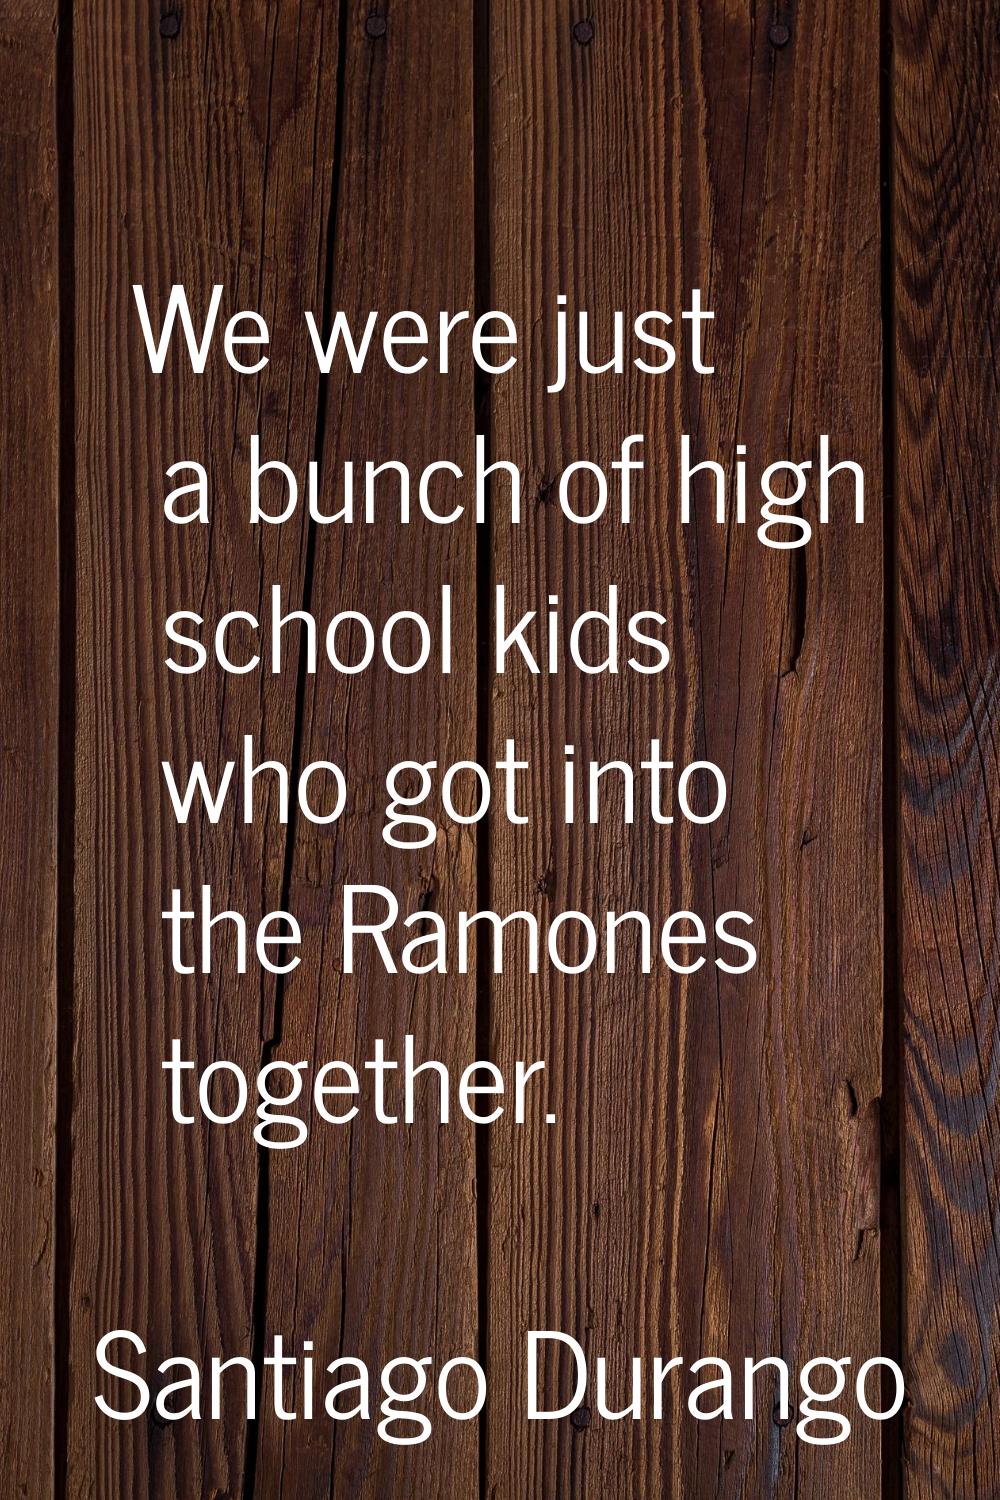 We were just a bunch of high school kids who got into the Ramones together.